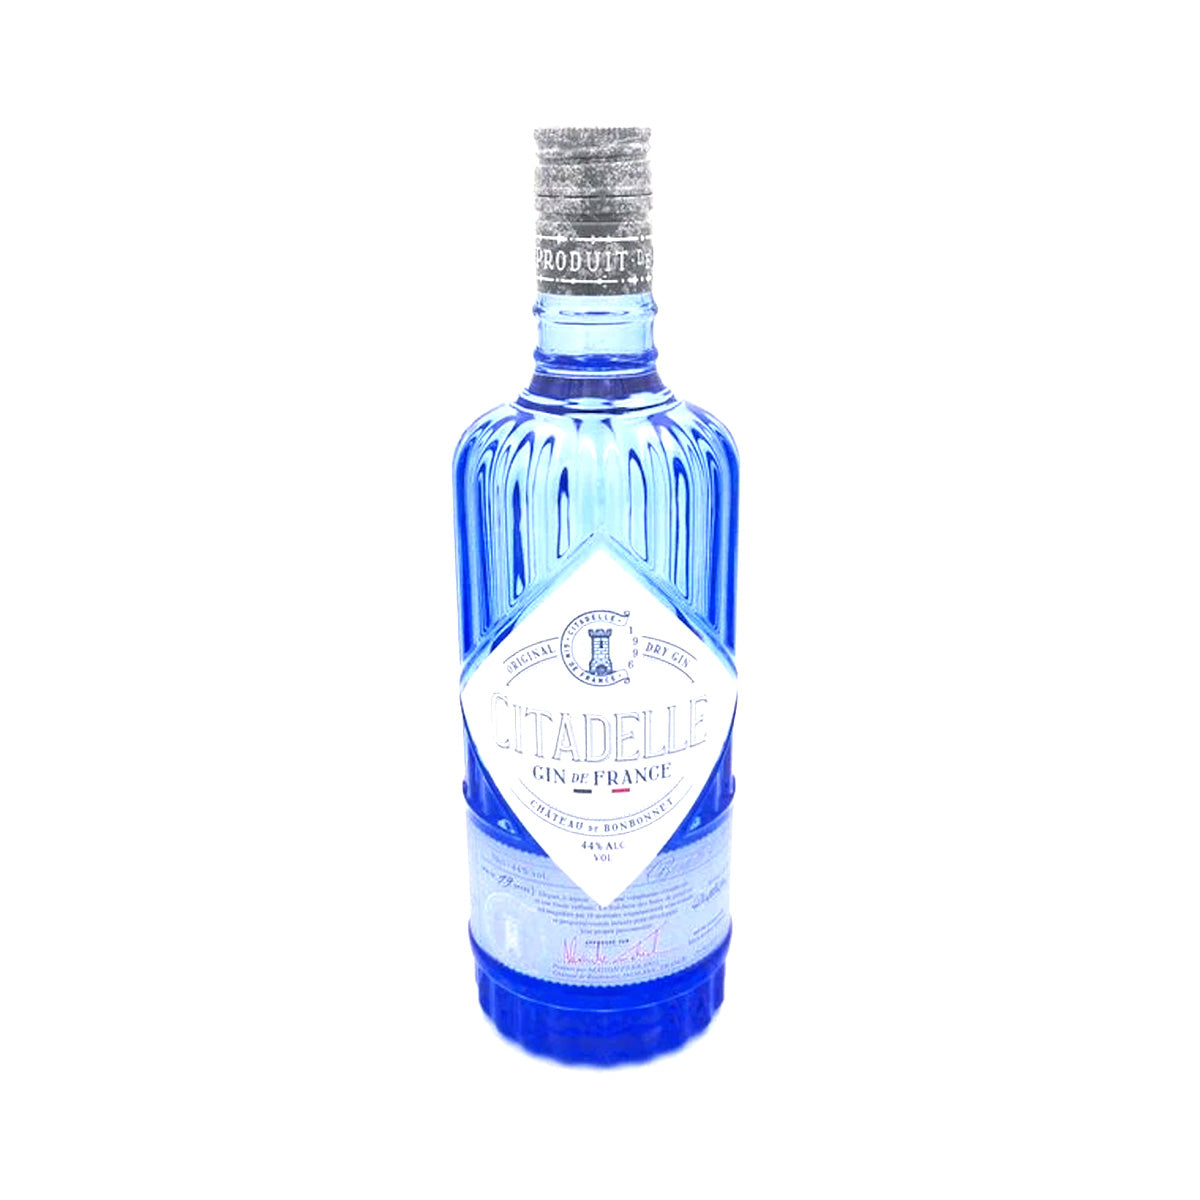 44% Citadelle – thewhiskycollectors Gin